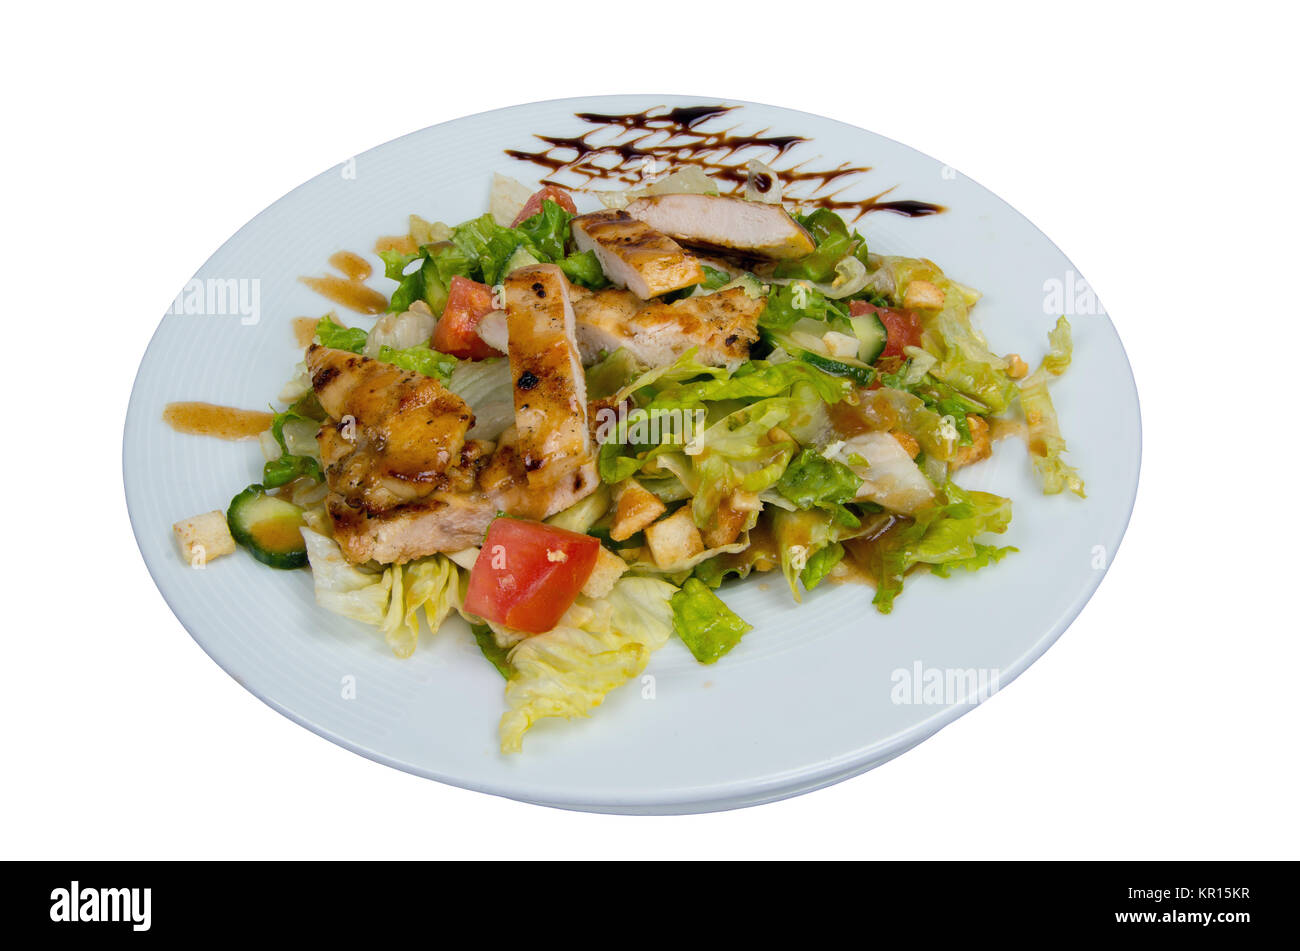 Vegetable salad with chicken fillet. Stock Photo